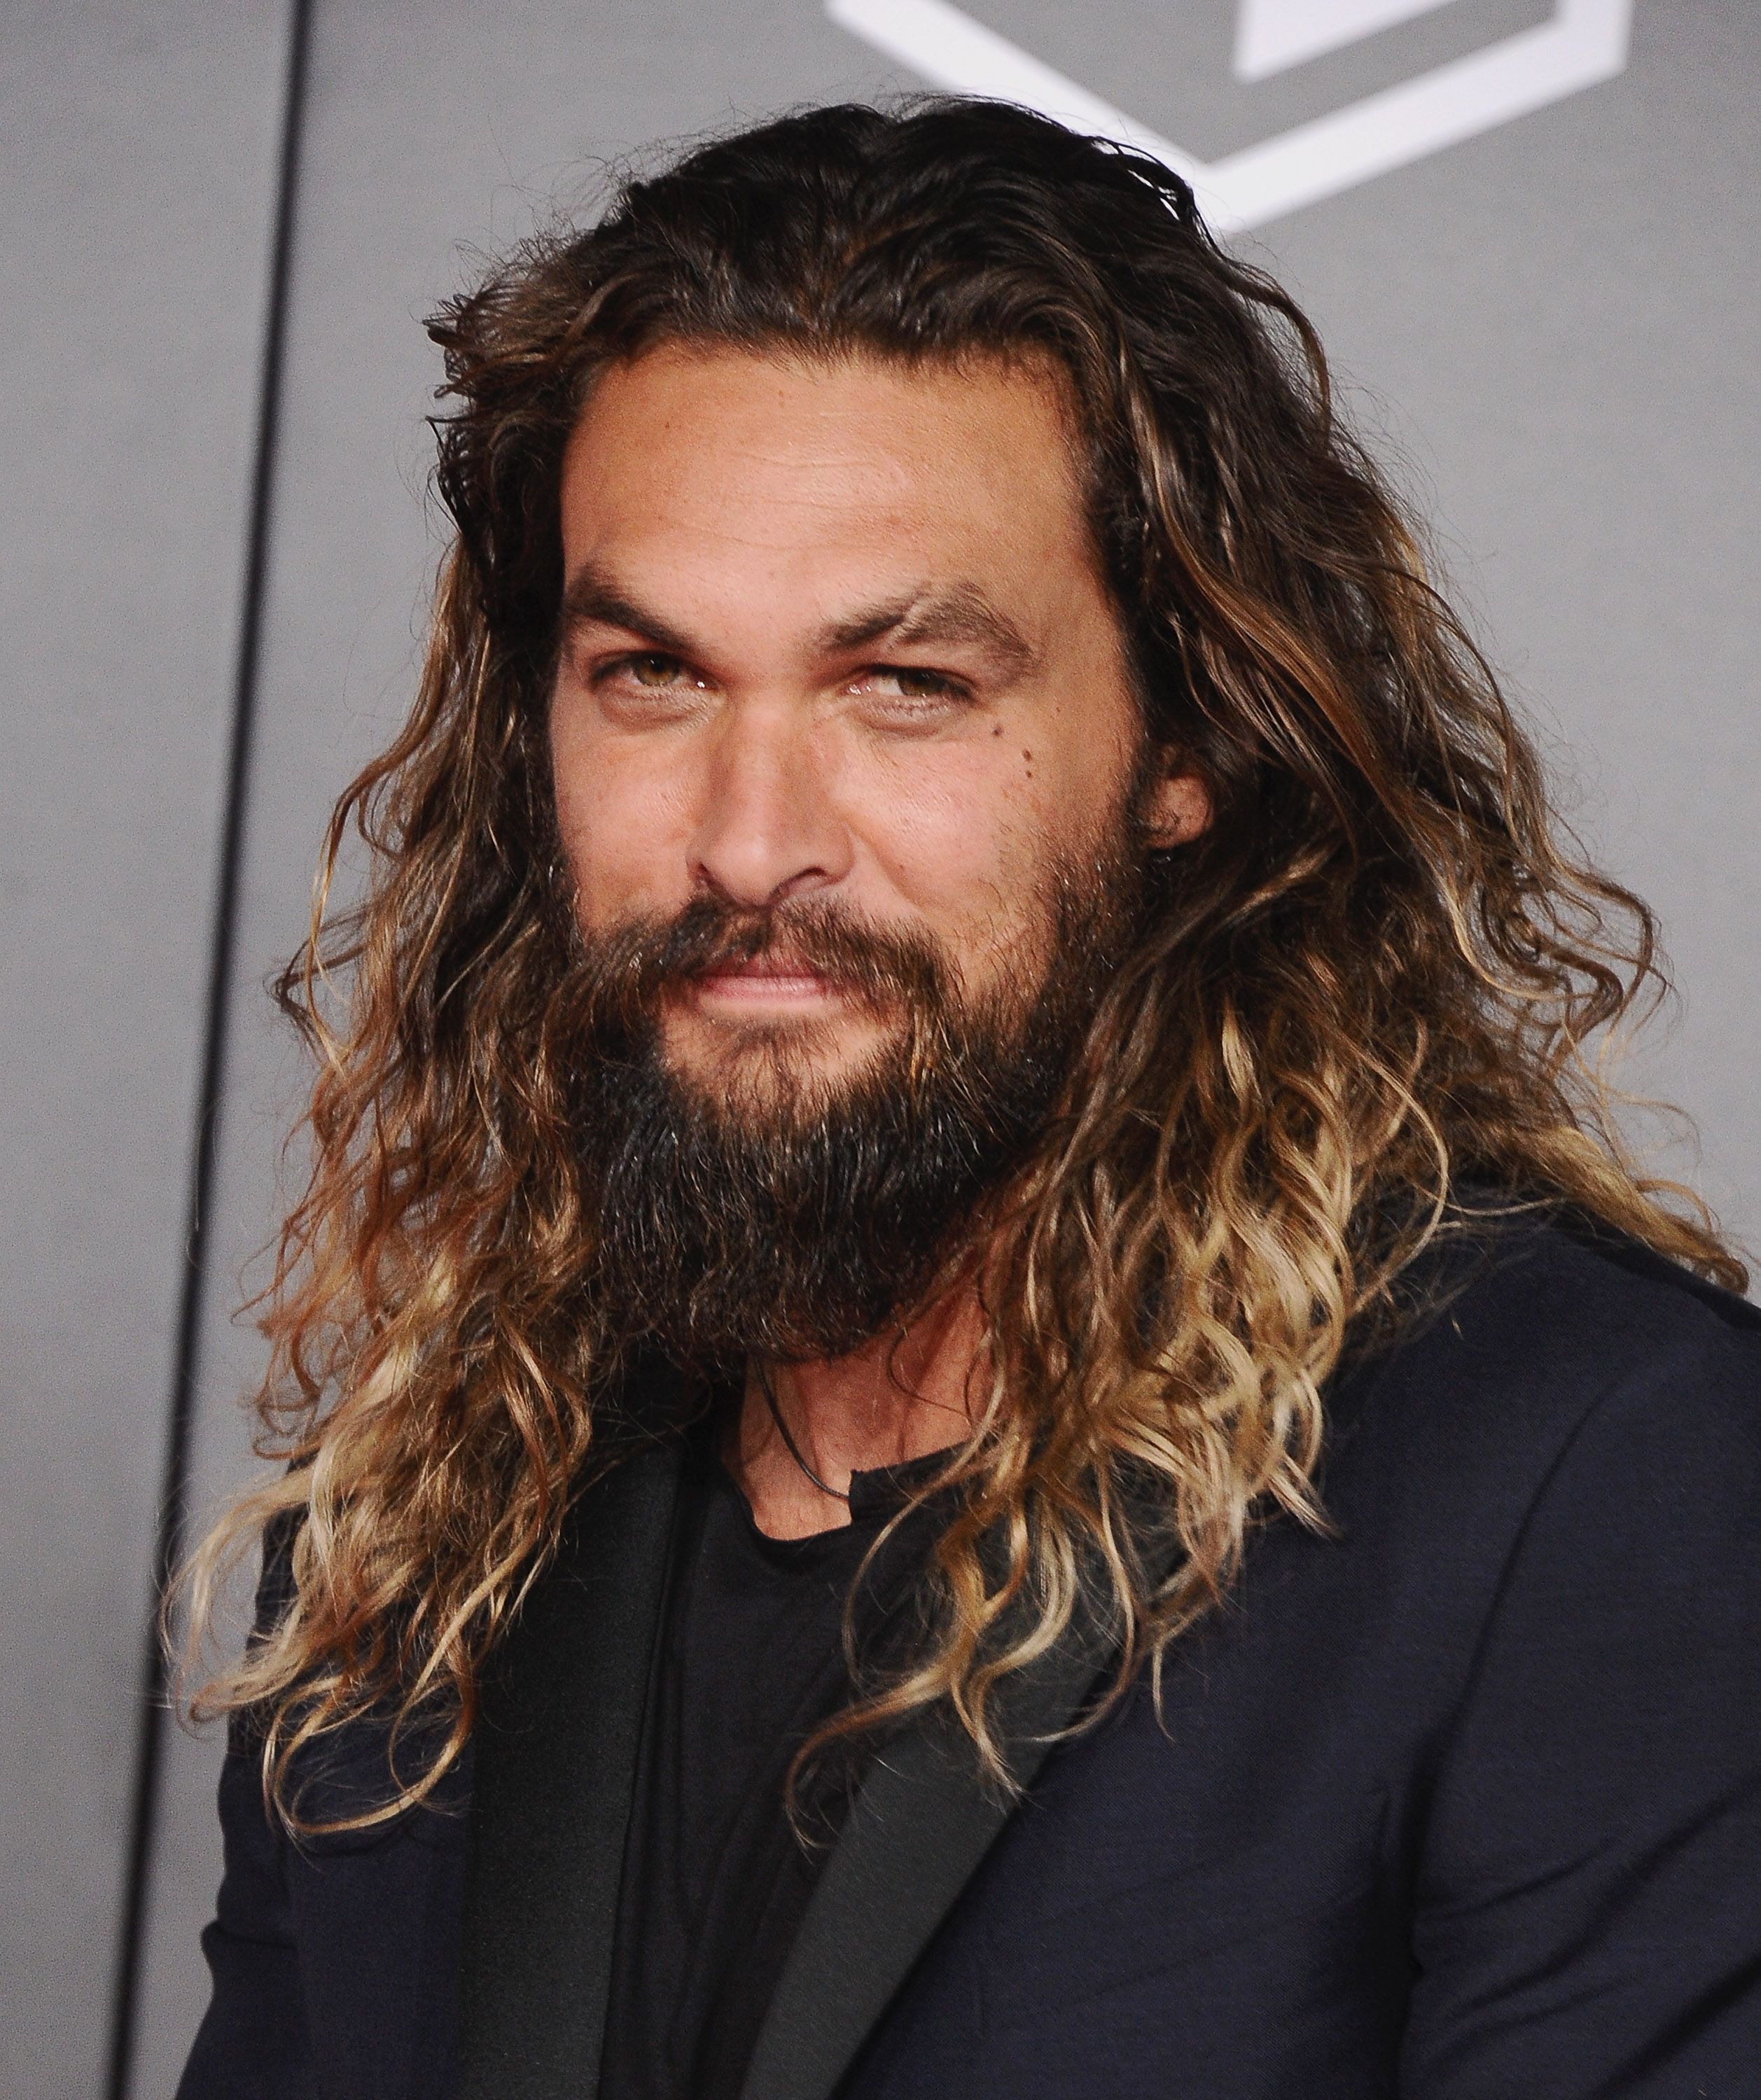 Jason Momoa during the Los Angeles premiere of "Justice League" at Dolby Theatre on November 13, 2017, in Hollywood, California. | Source: Getty Images